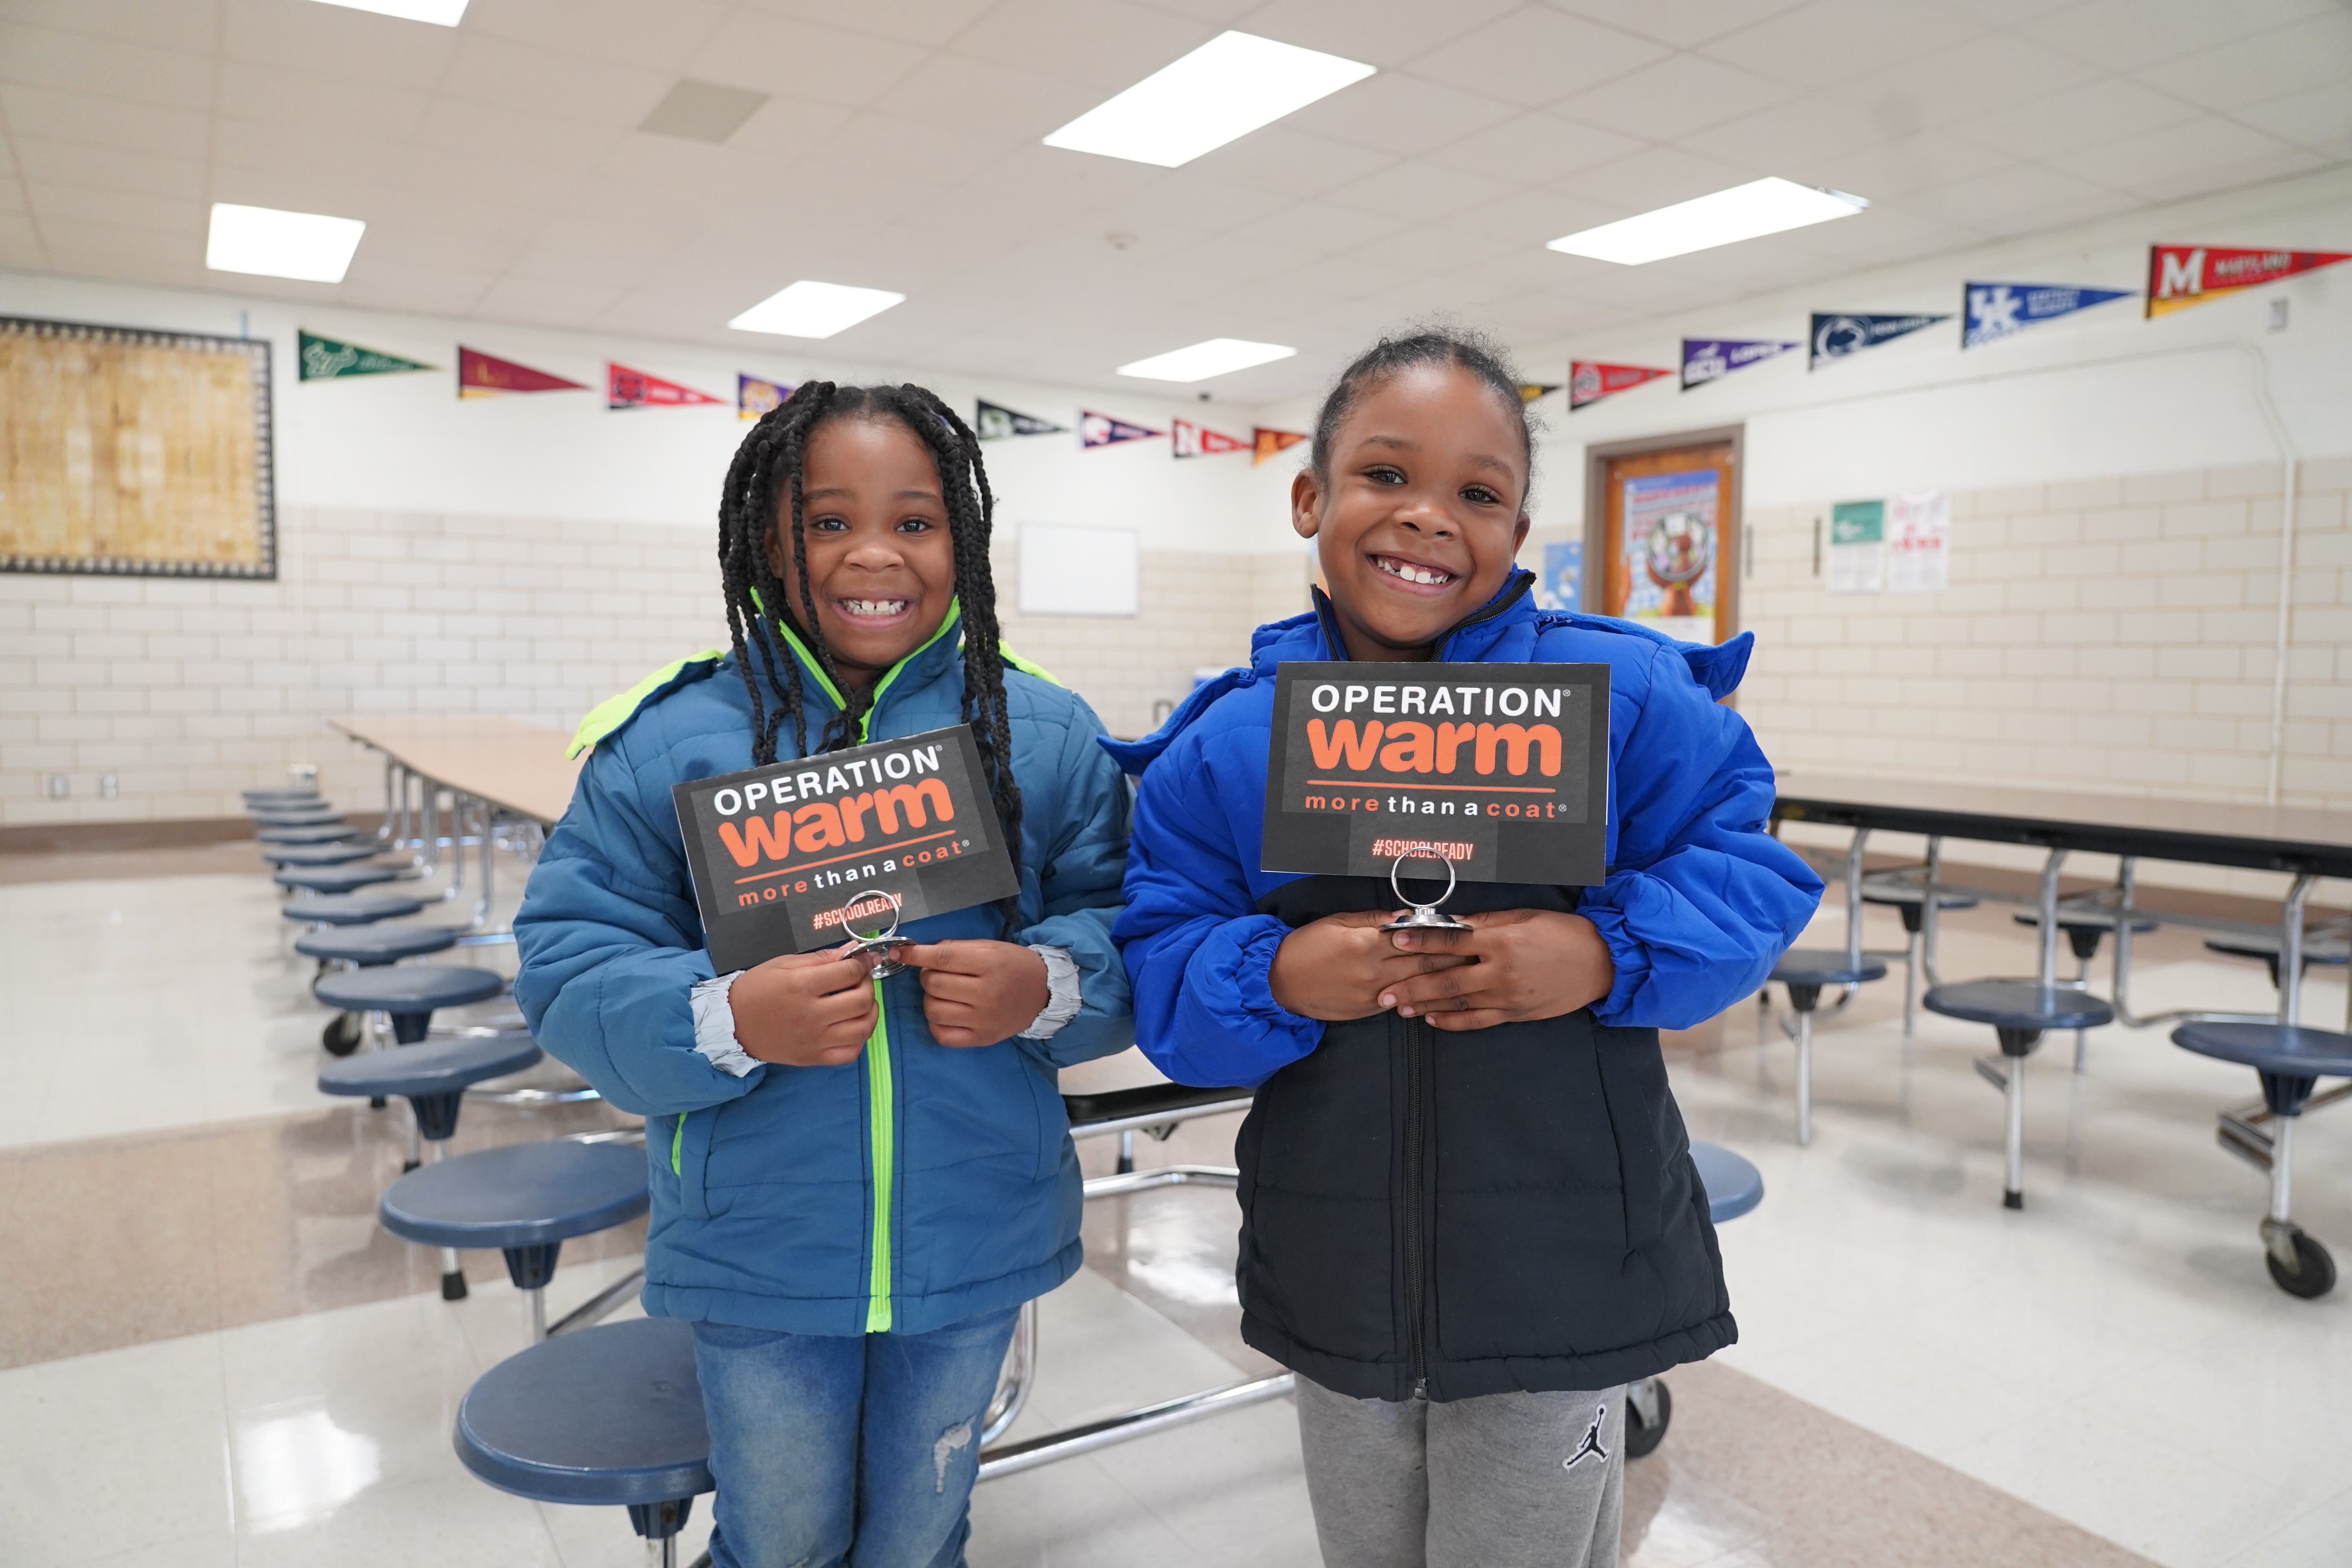 Two Hommel Students Holding "Operation Warm" signs.